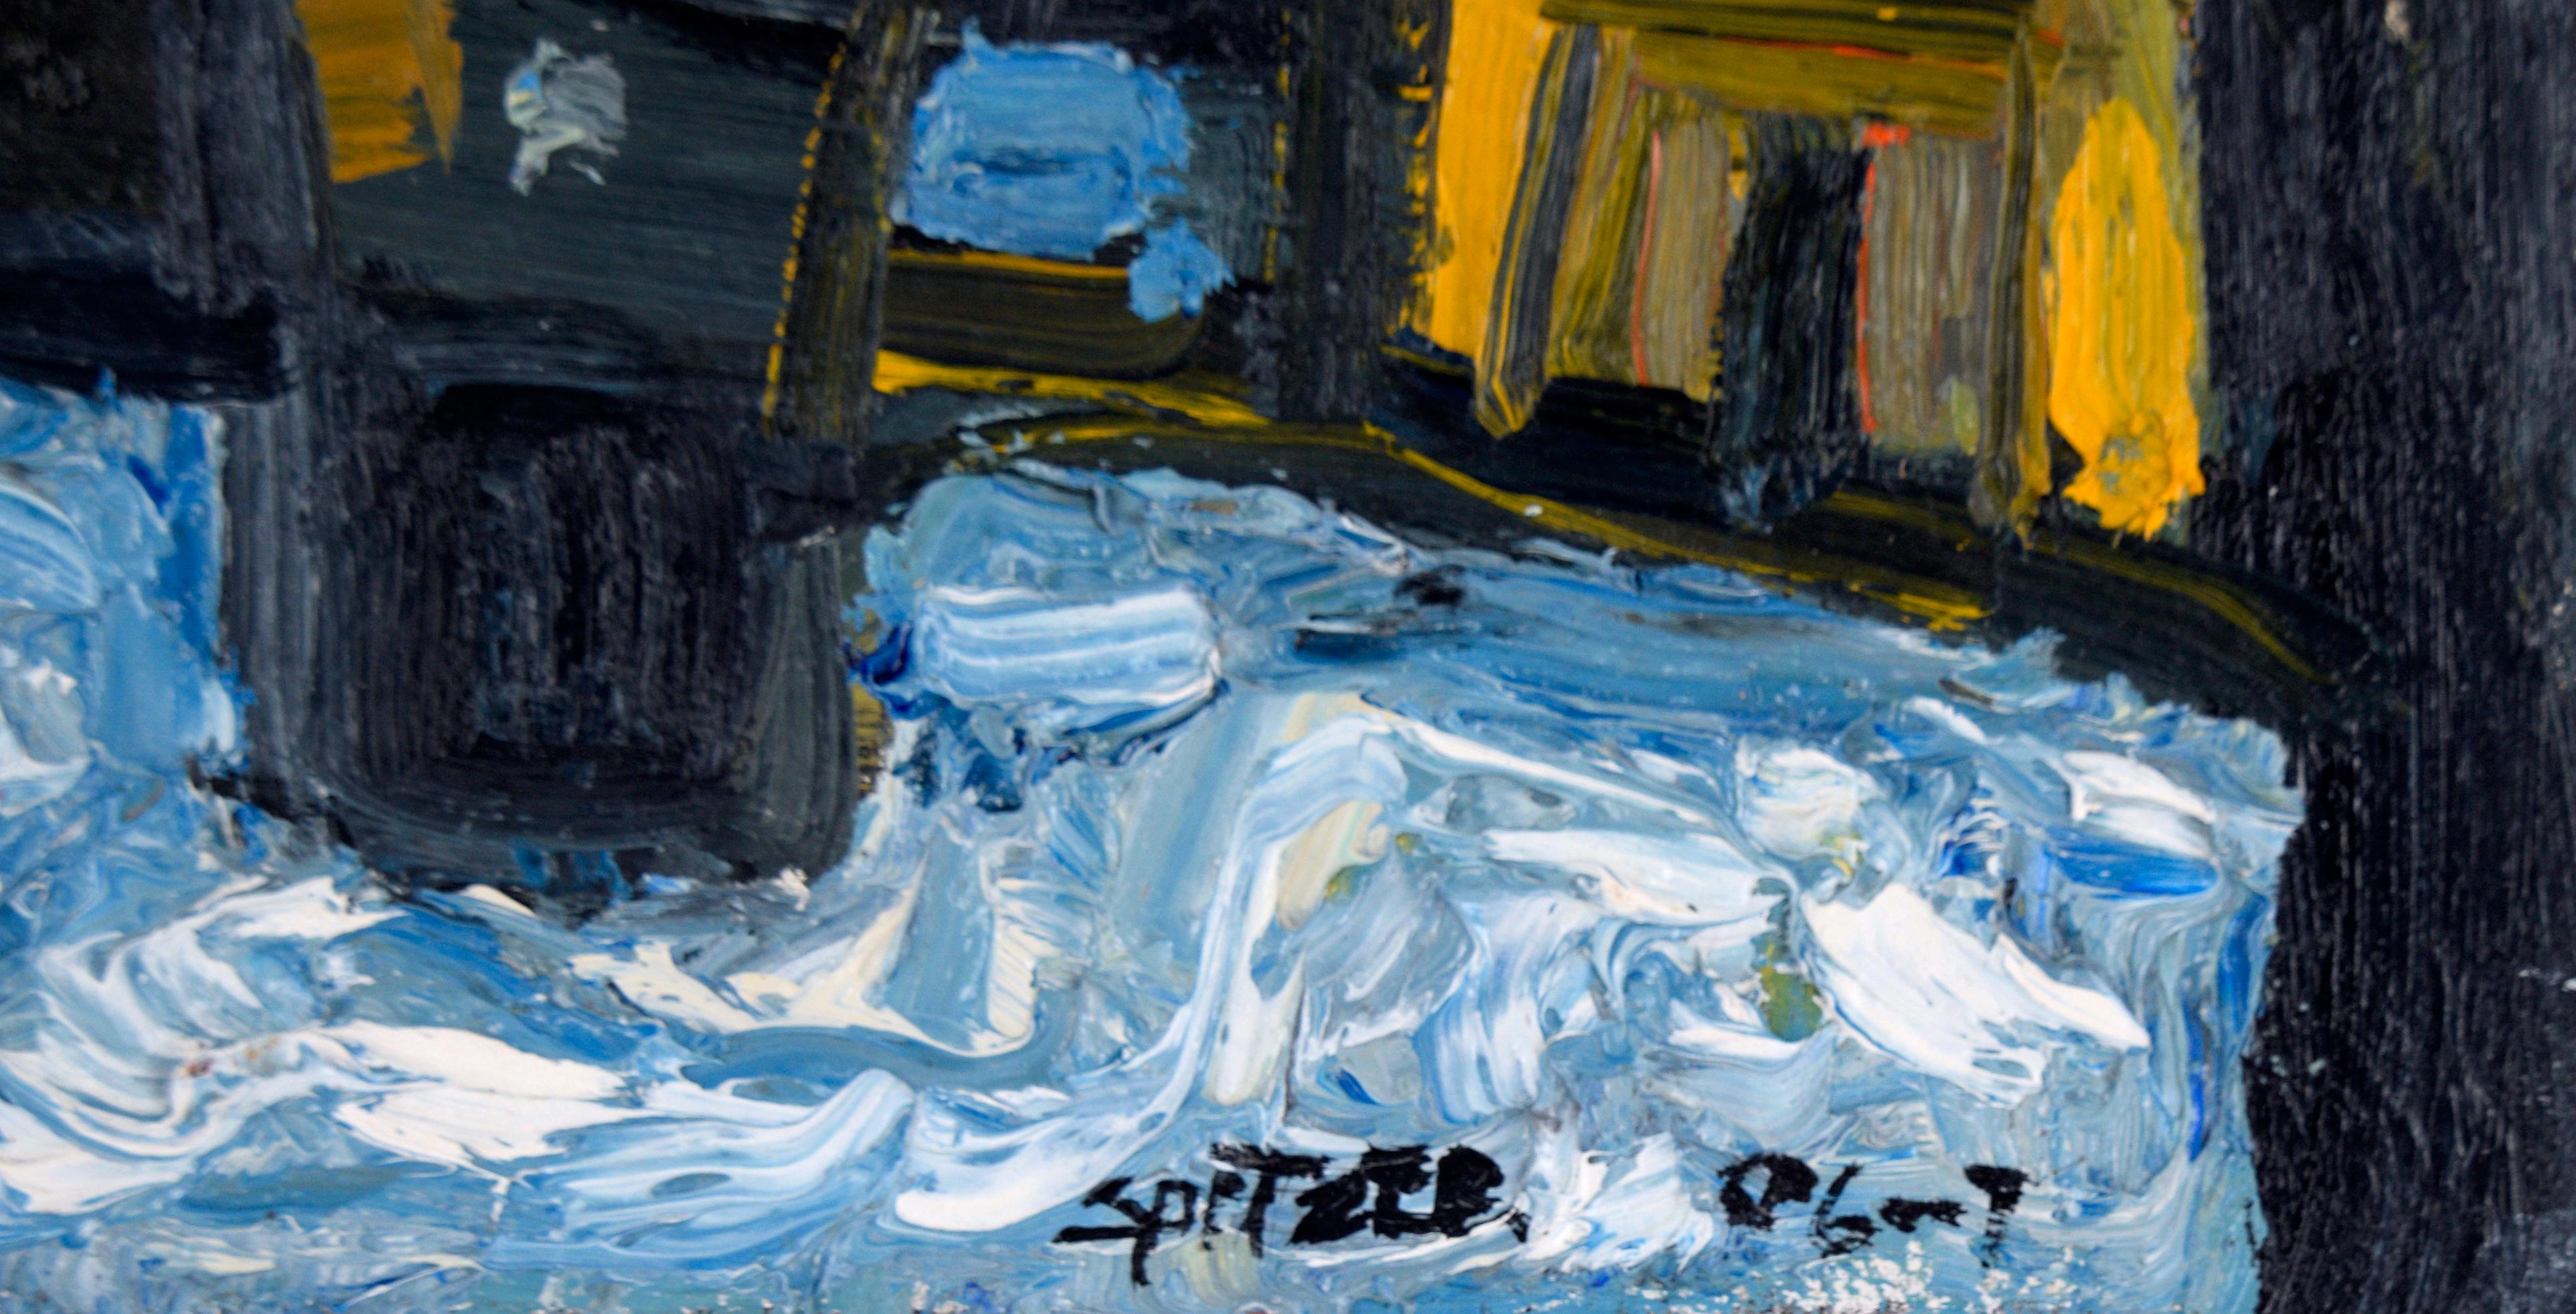 Heavy impasto and strong contrasting colors create a strong piece by Jim Spitzer (American, 1936-2018). Above a dark cityscape, a swirling, richly textured sky is filled with blue, white, yellow, and grey. The city below is created from heavy black